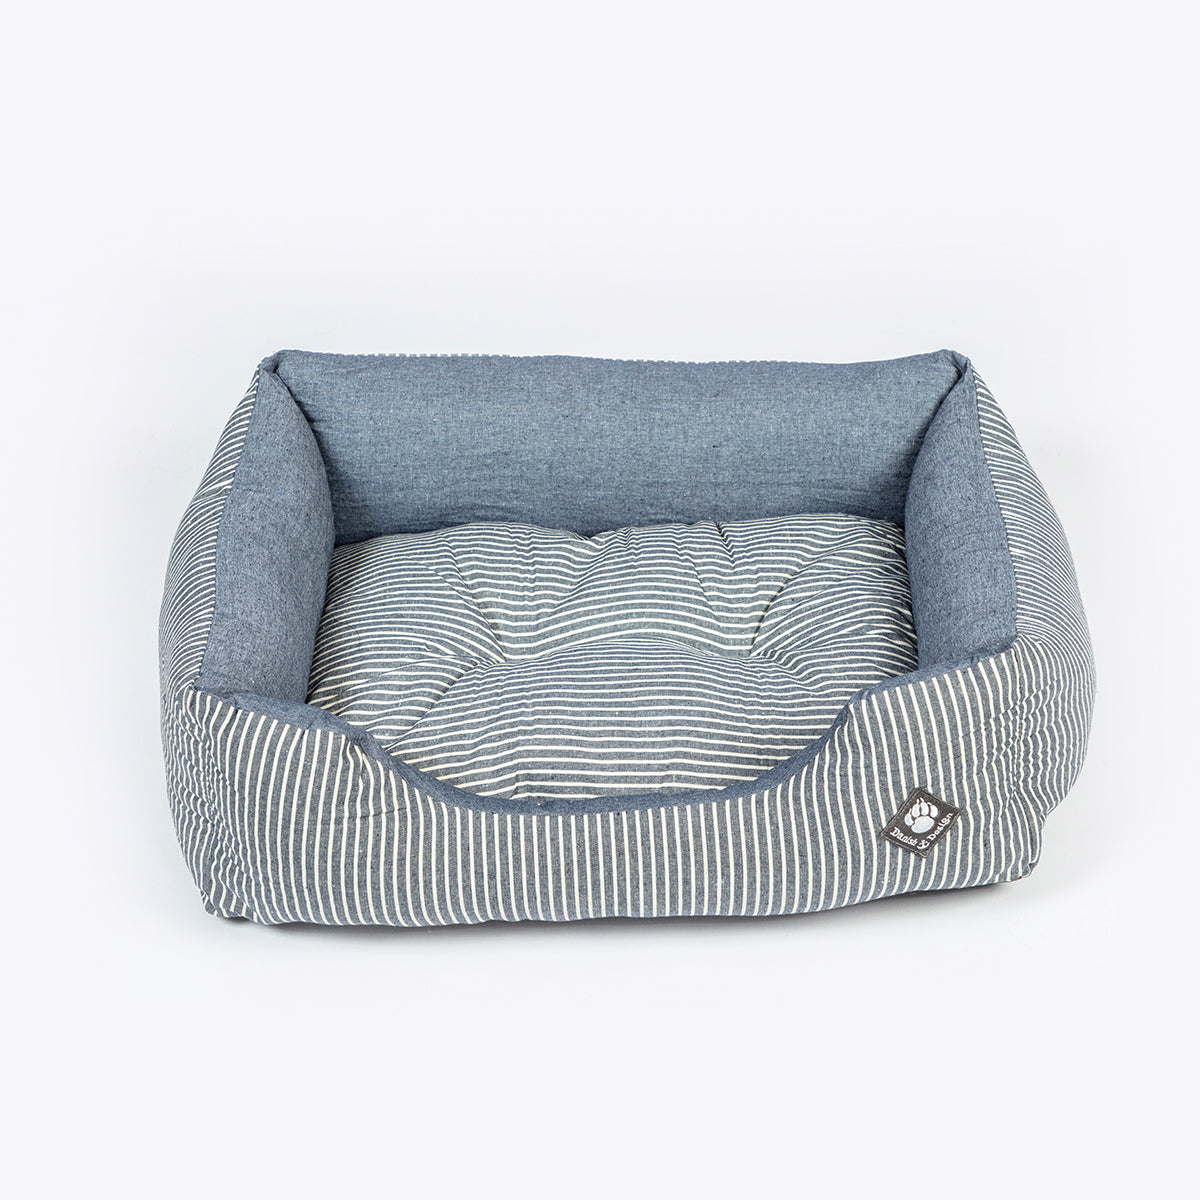 Image of Danish Design Maritime Blue Snuggle Dog Bed - Small 18 inches